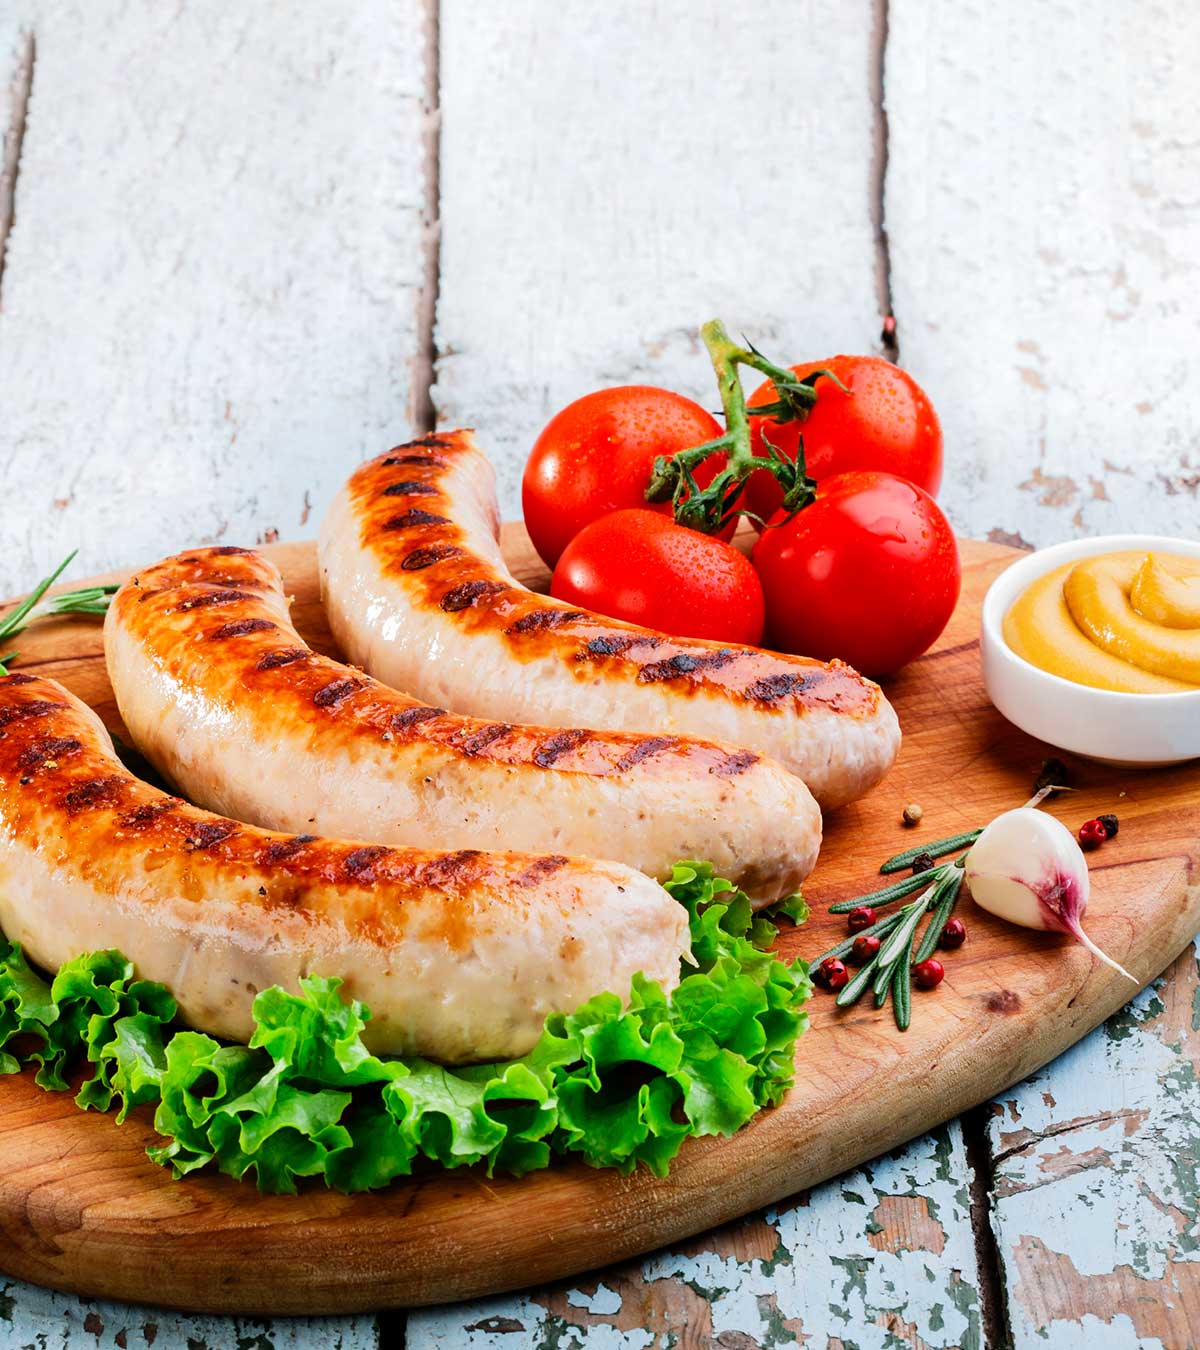 Is It Safe To Eat Bratwurst During Pregnancy?